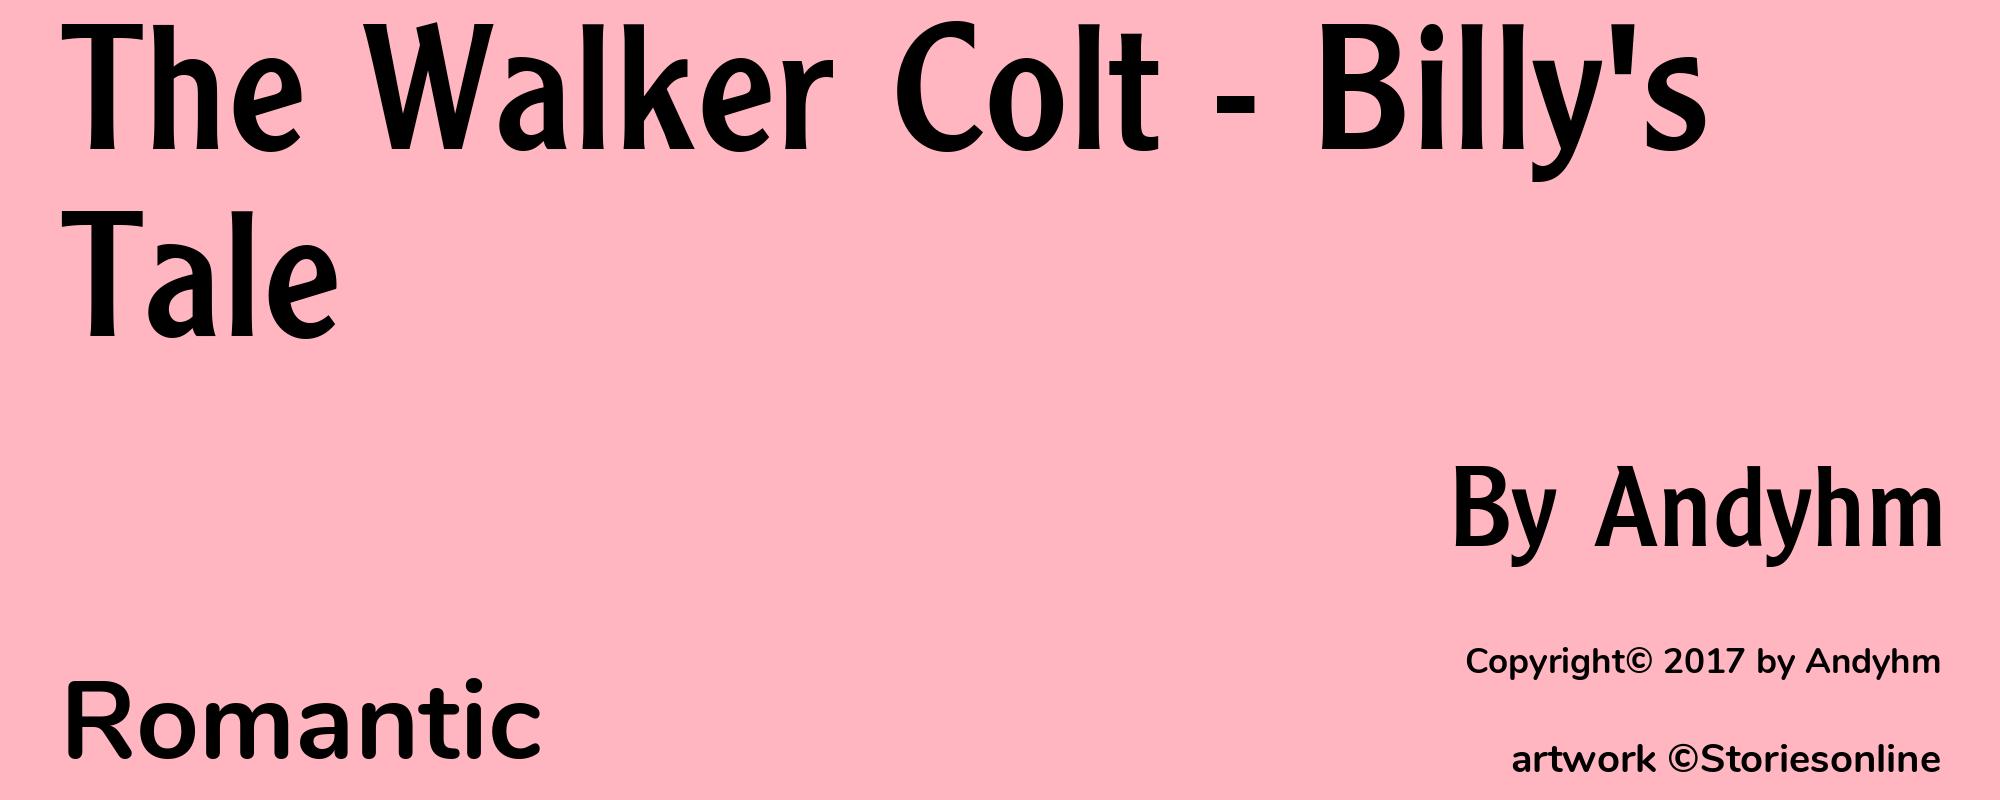 The Walker Colt - Billy's Tale - Cover